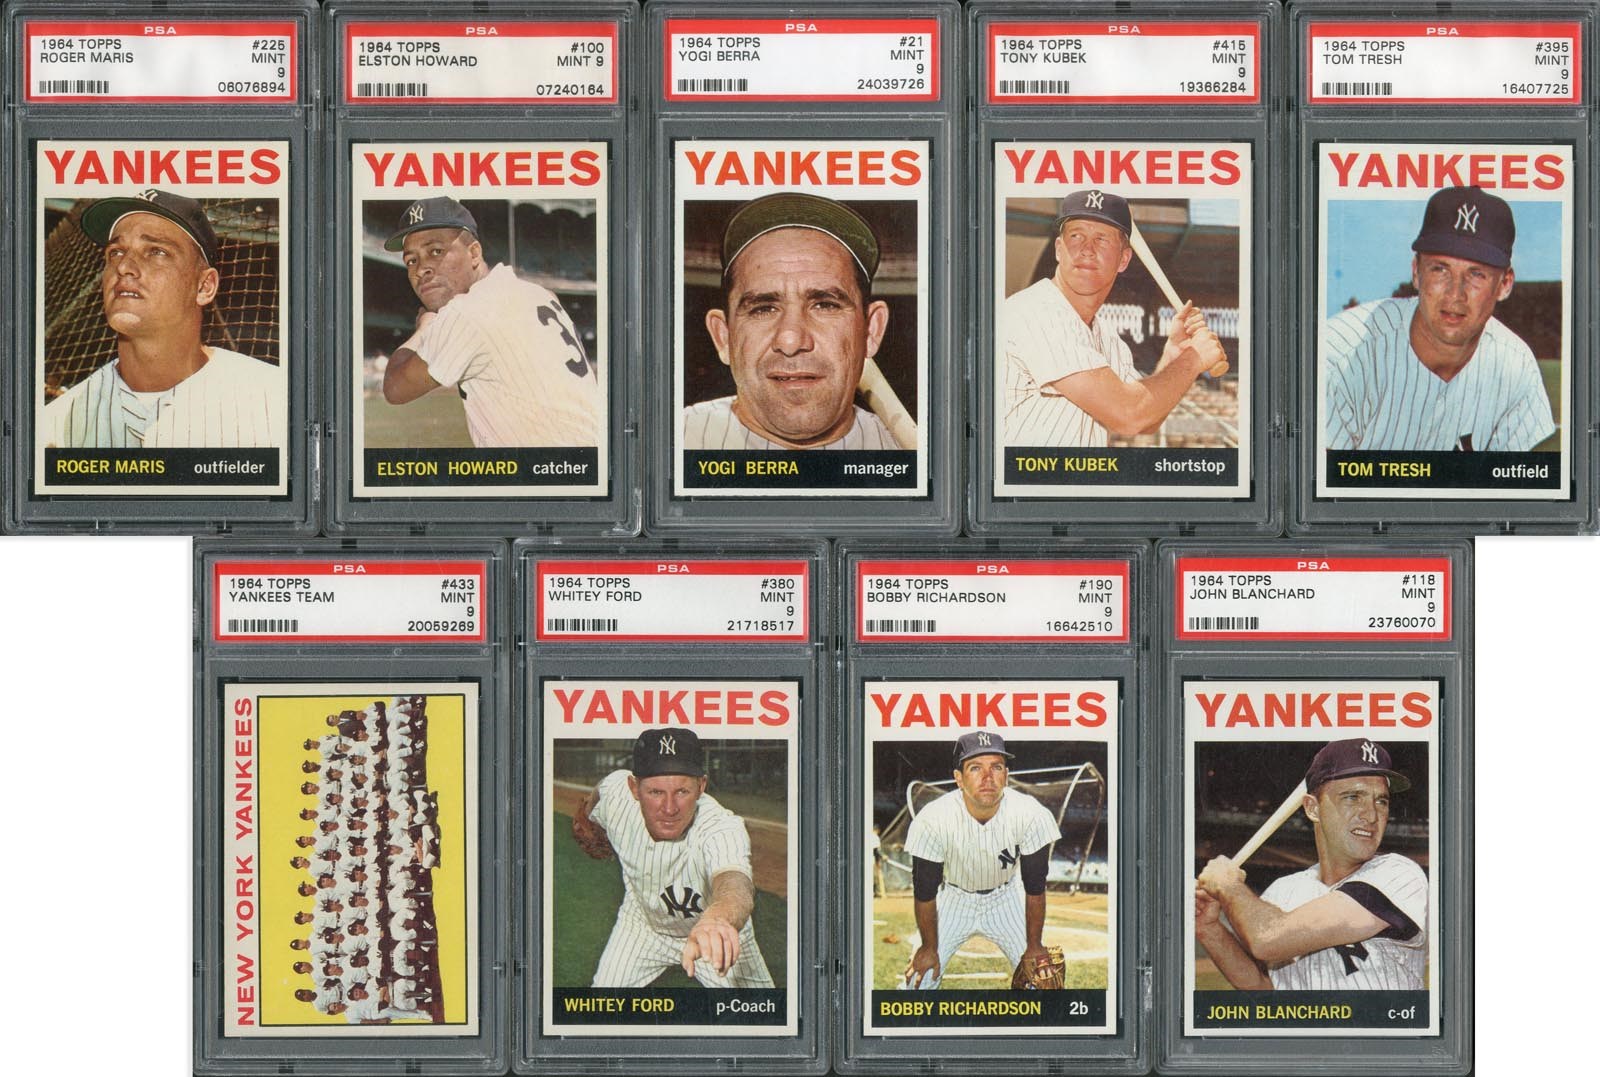 1964 Topps Yankees PSA MINT 9 Collection (21)